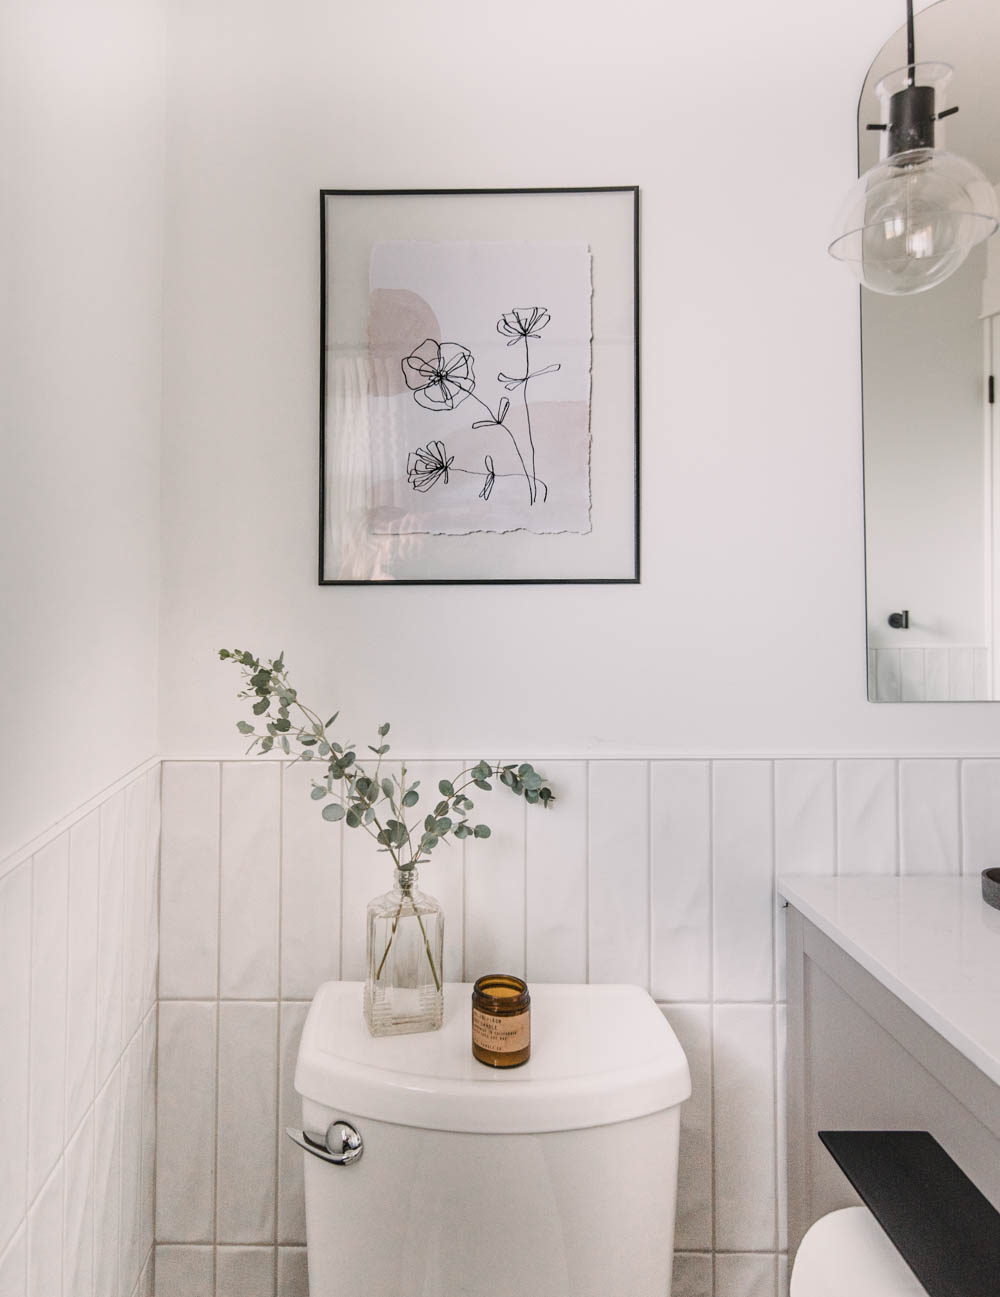 DIY Line Art and Watercolor wall decor in floating frame for a bathroom